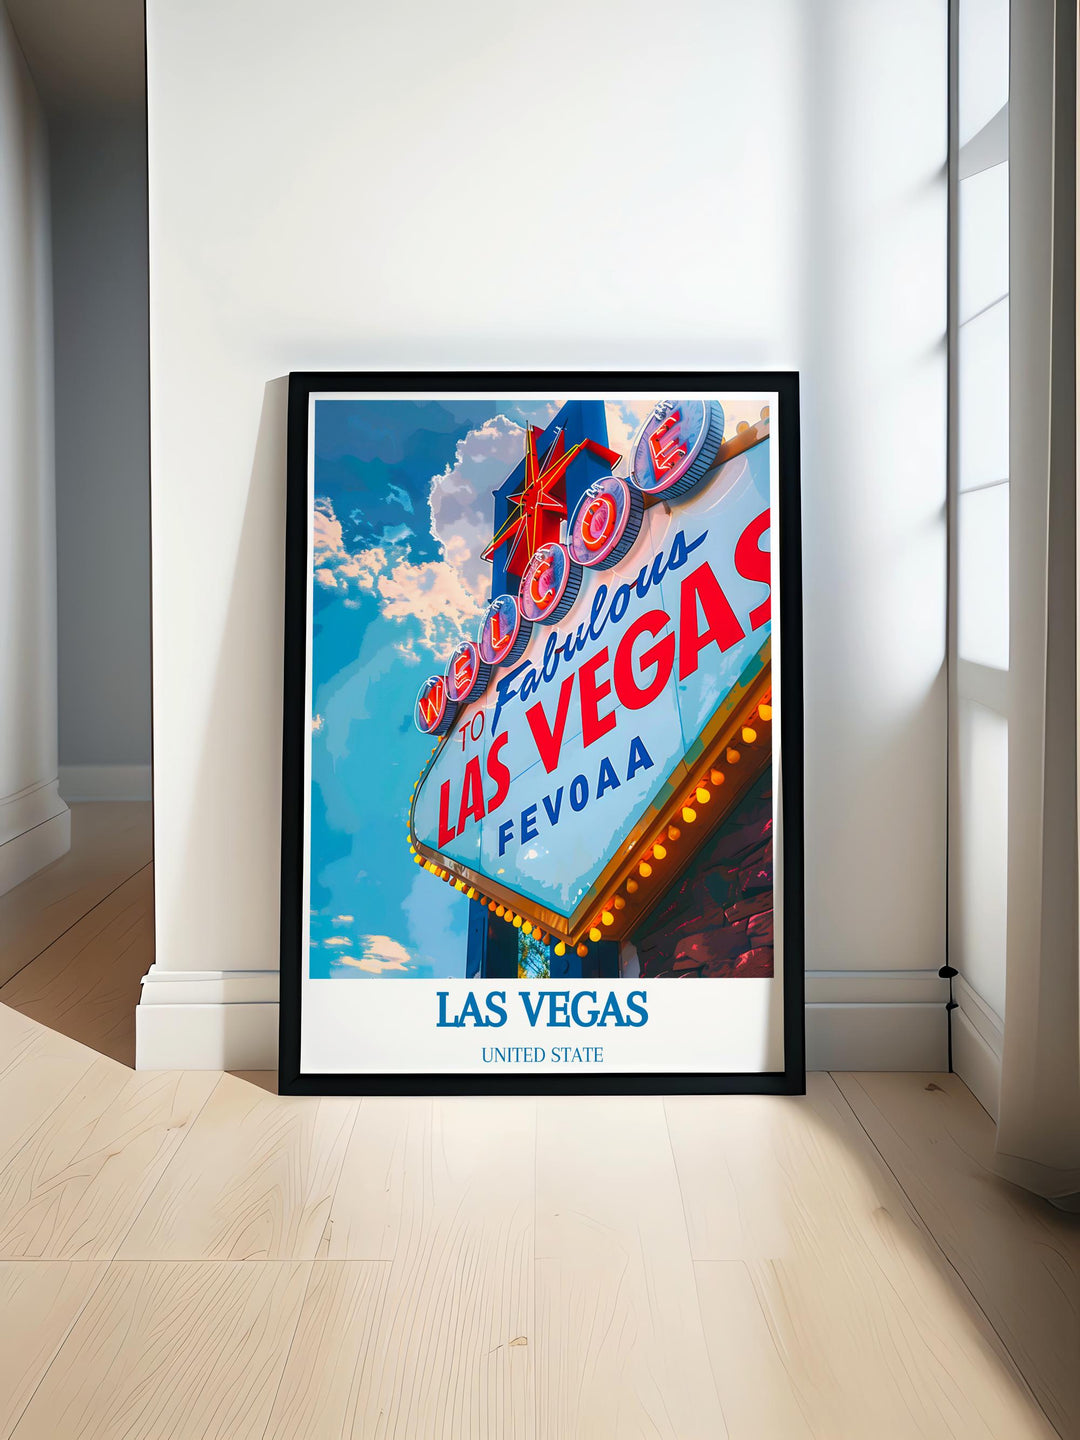 Modern wall decor featuring Las Vegas, perfect for adding a contemporary urban vibe to any interior design.